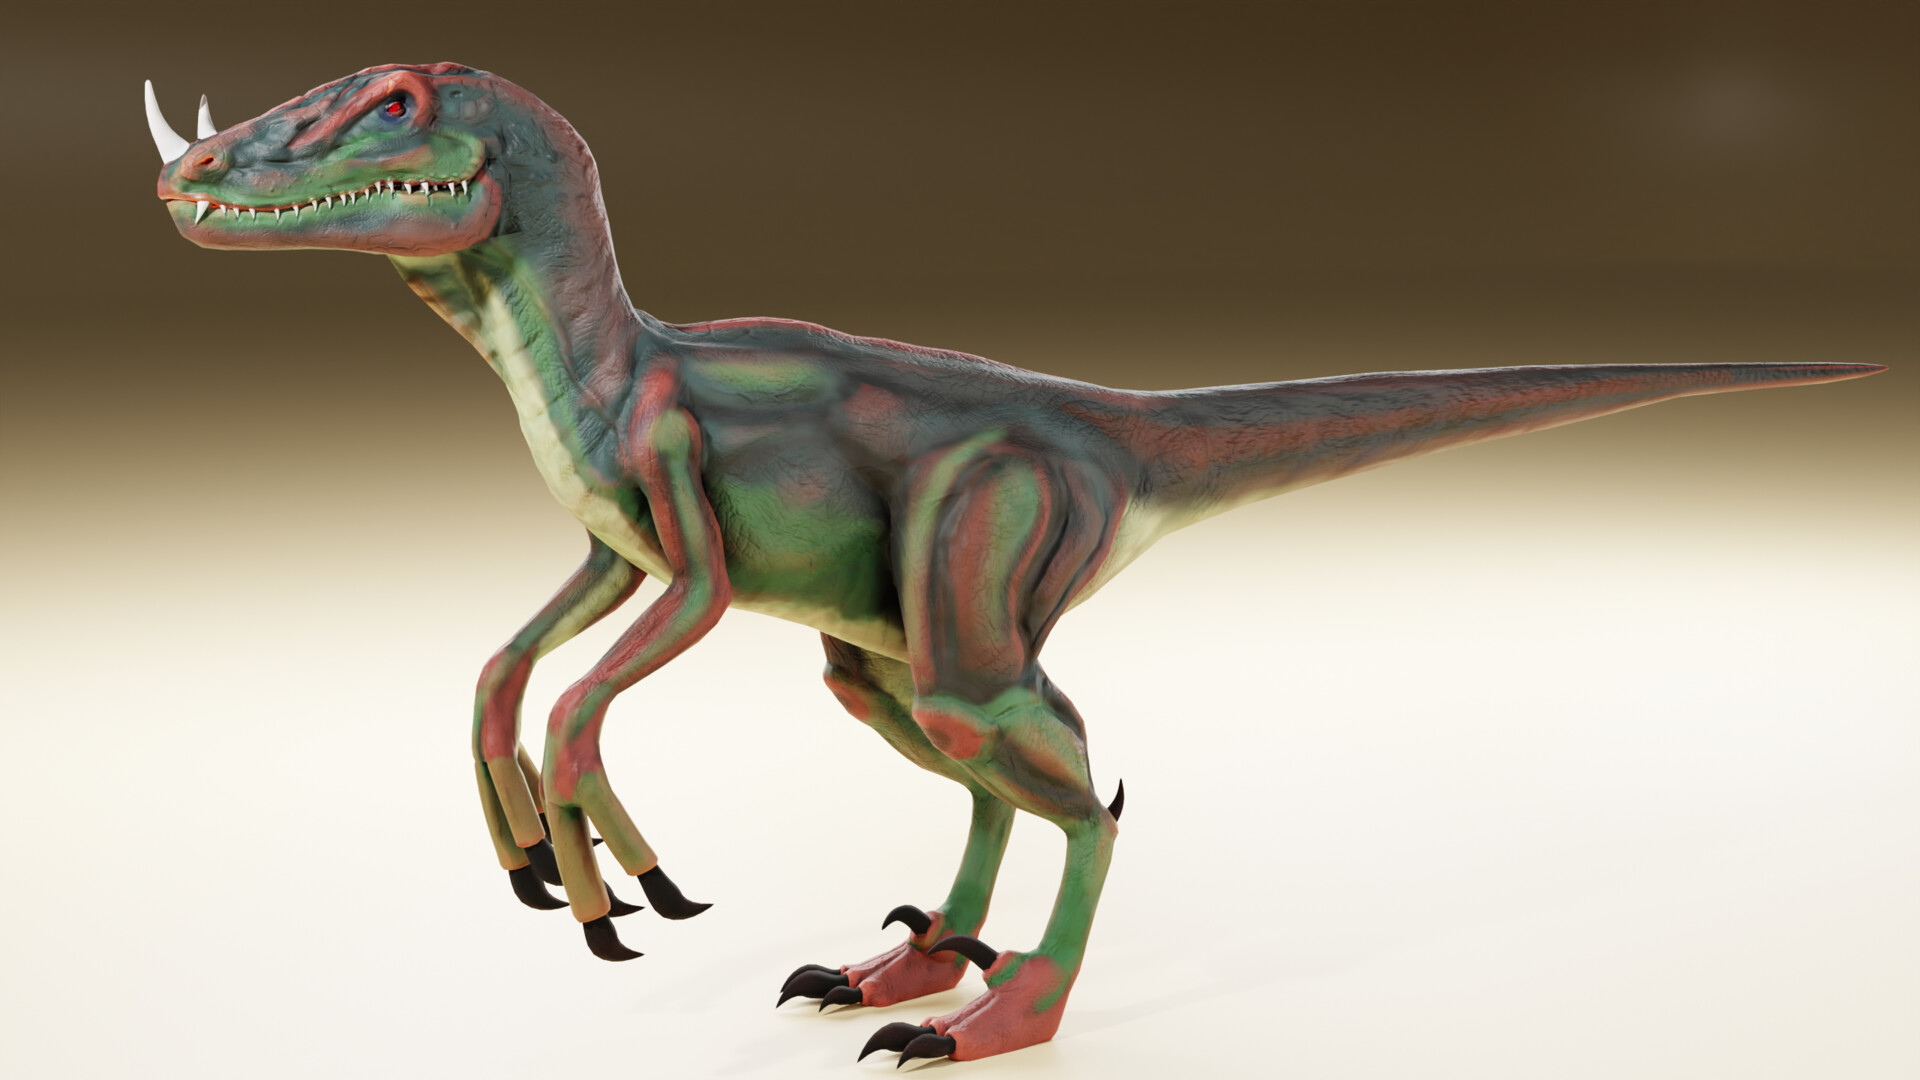 Dracrex Dinosaur On The Run - 3d Render Using Special Shaders That